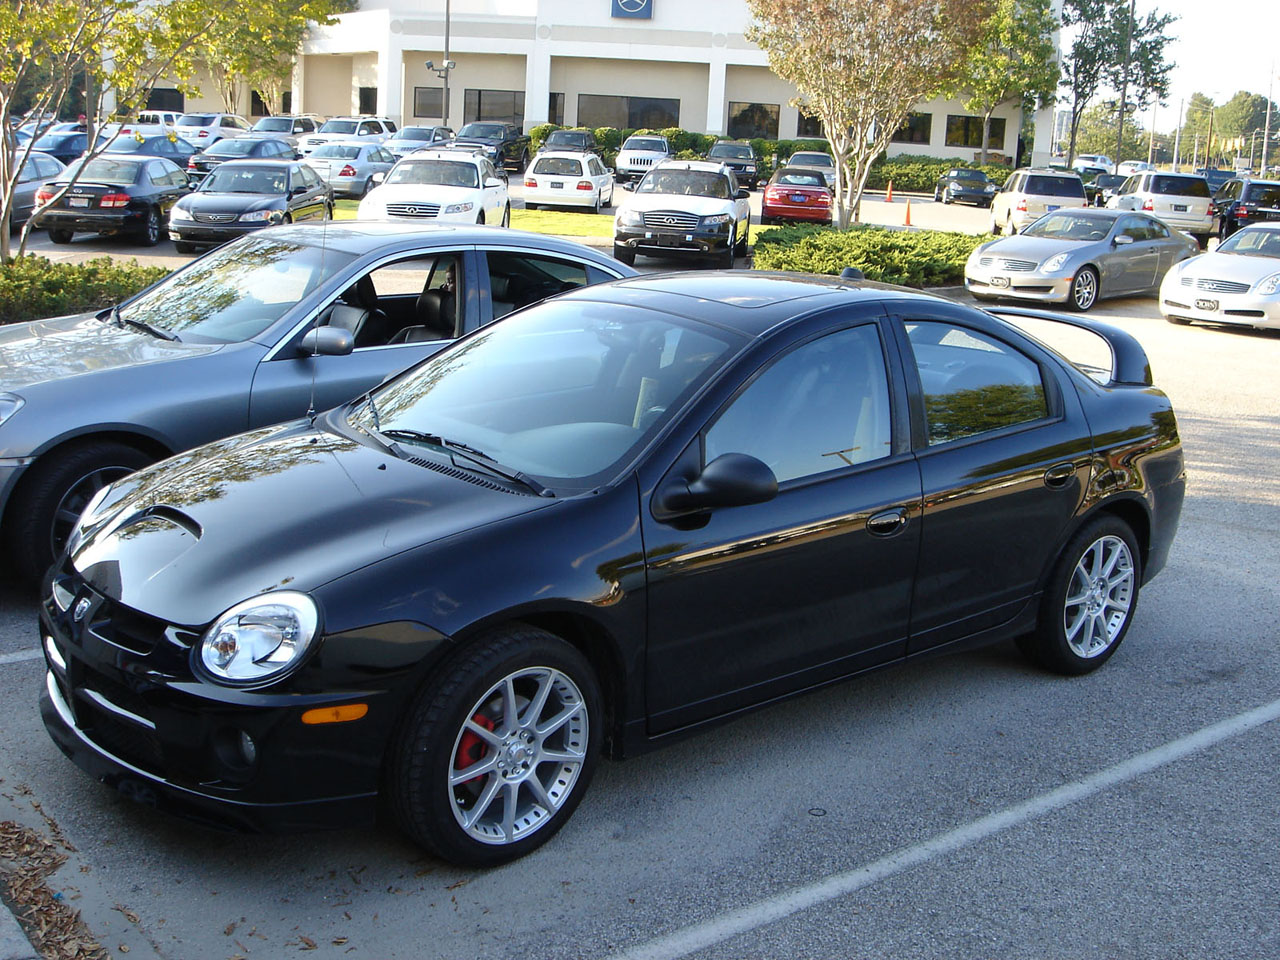 Dodge Neon - huge collection of cars, auto news and reviews, car vitals,